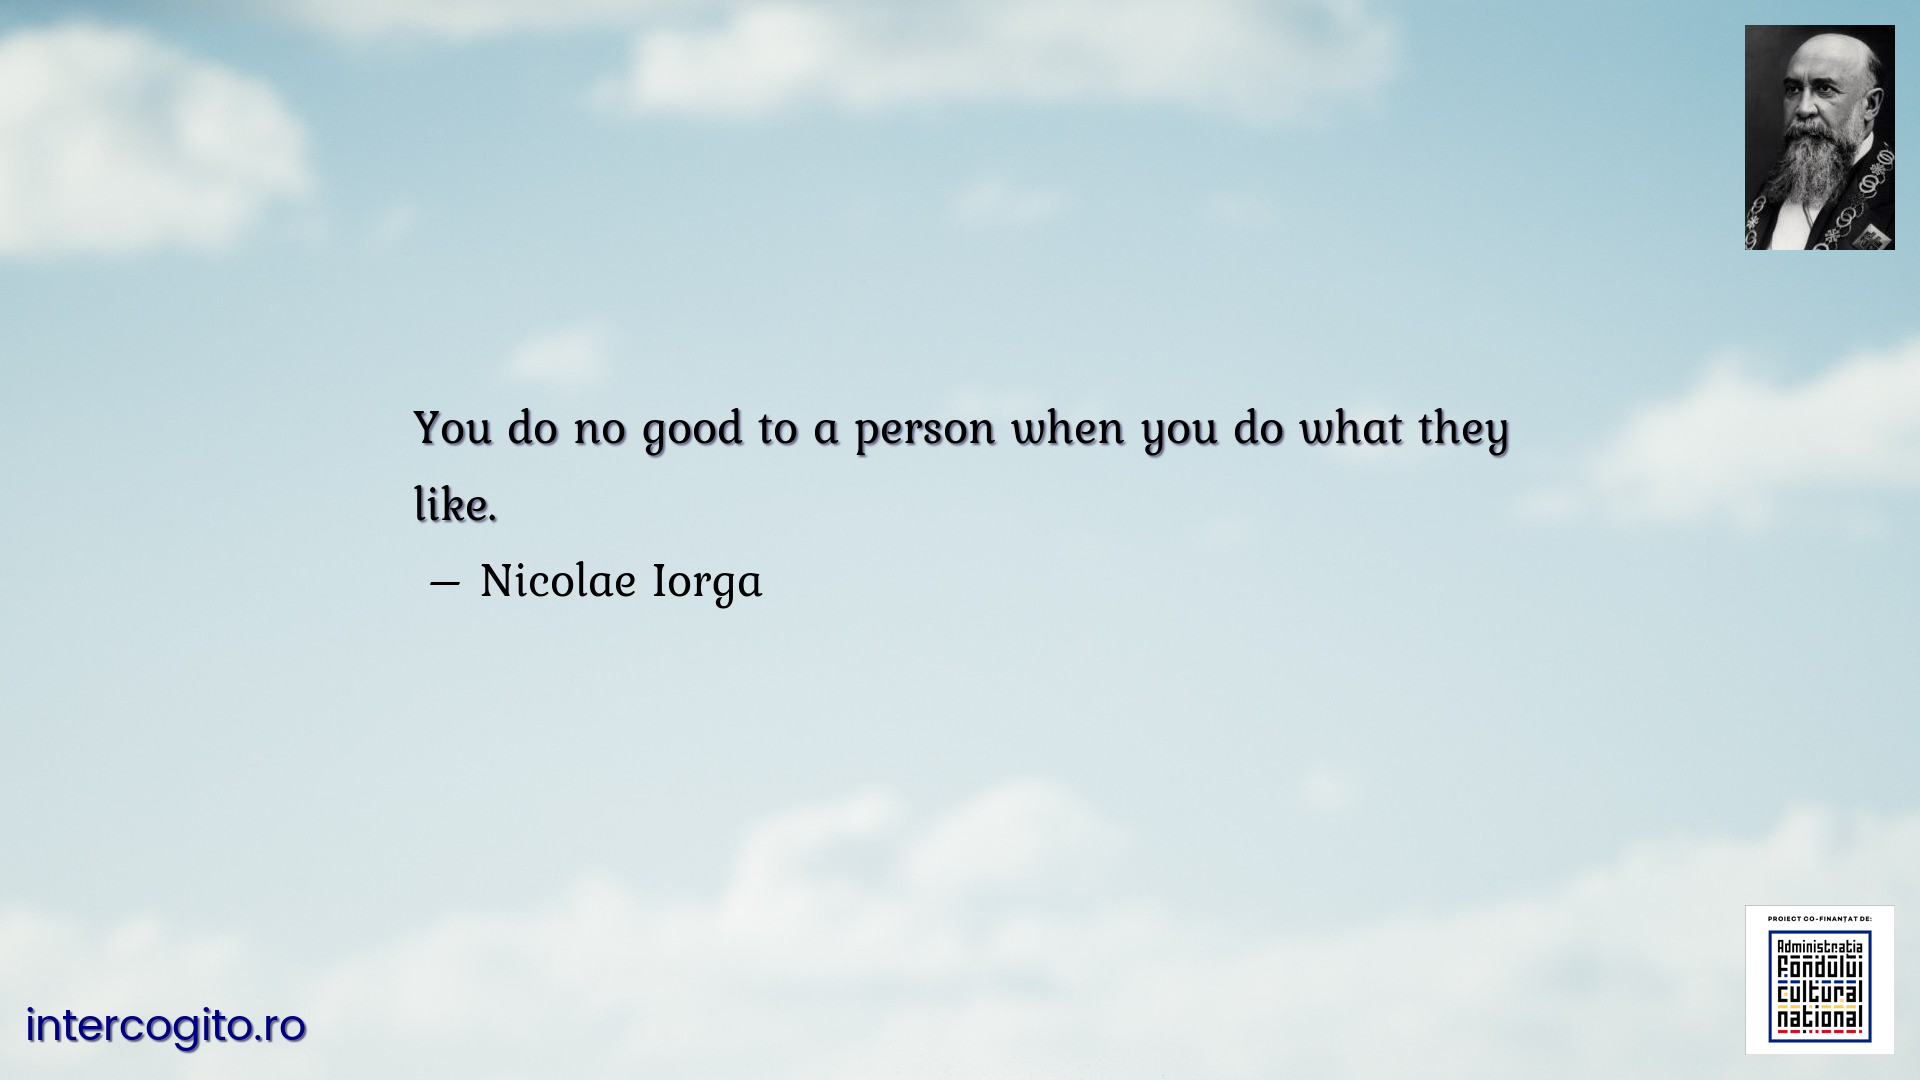 You do no good to a person when you do what they like.